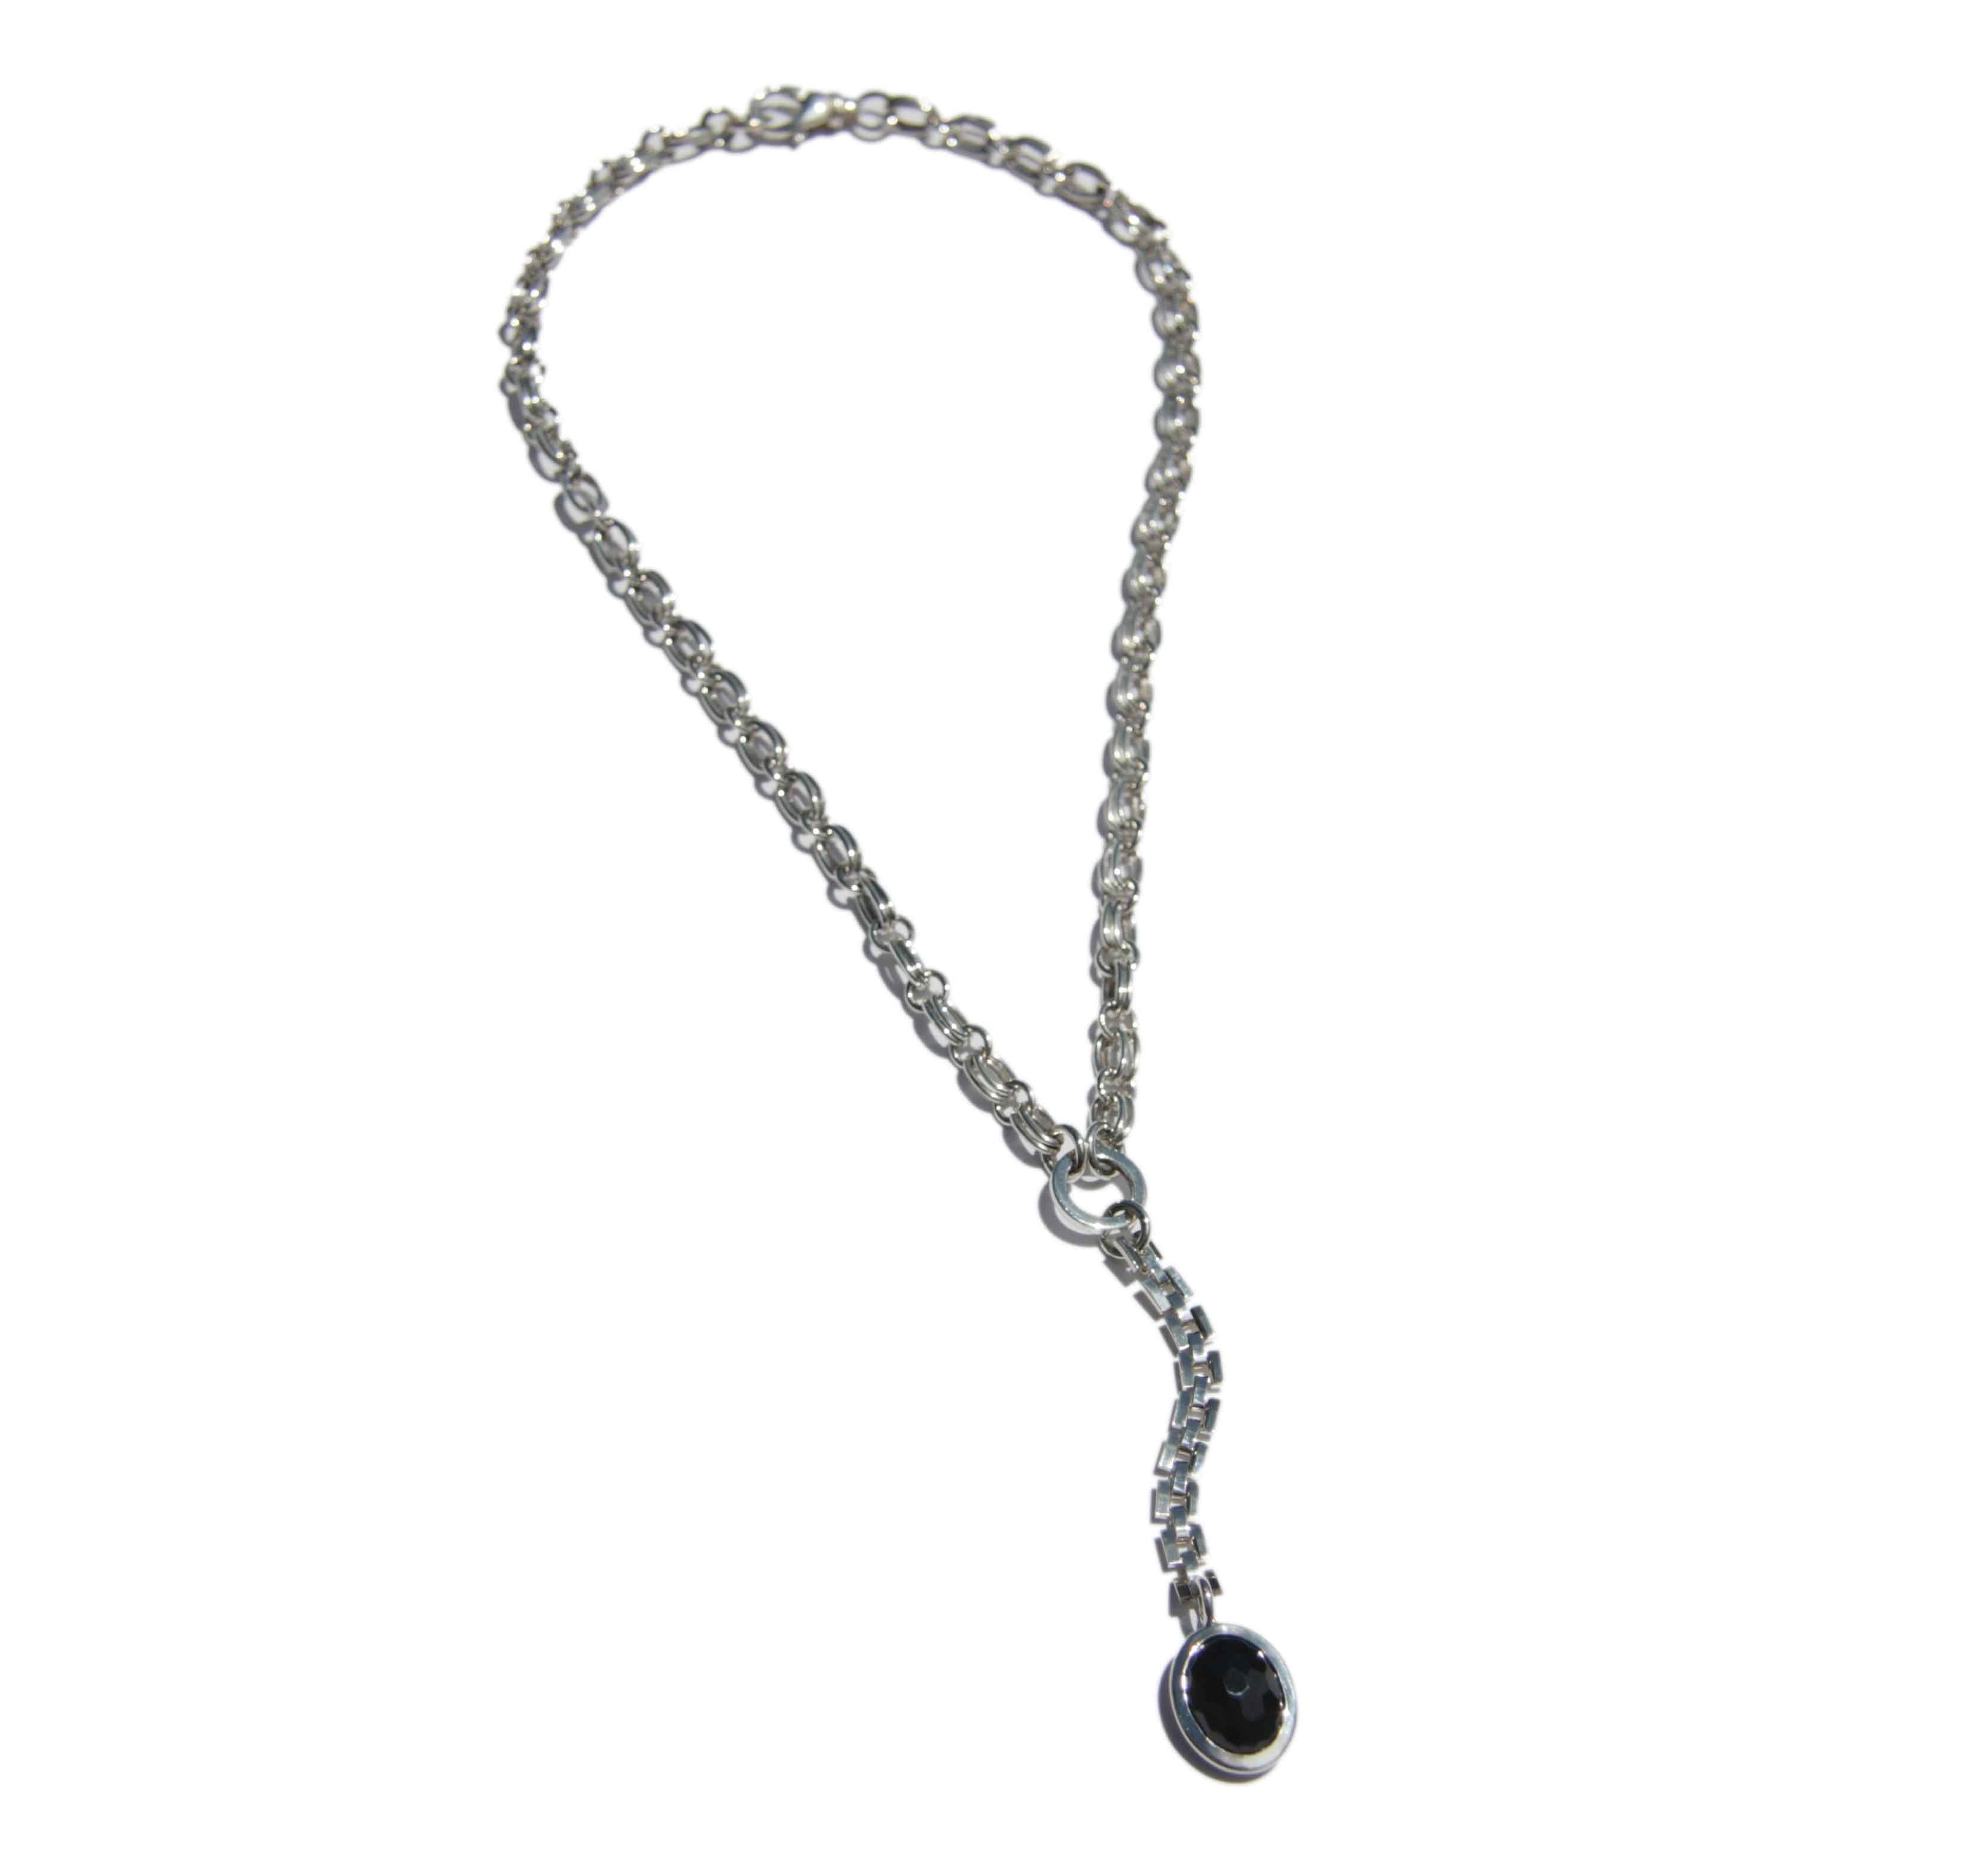 Silver chain necklace with faceted onyx pendant